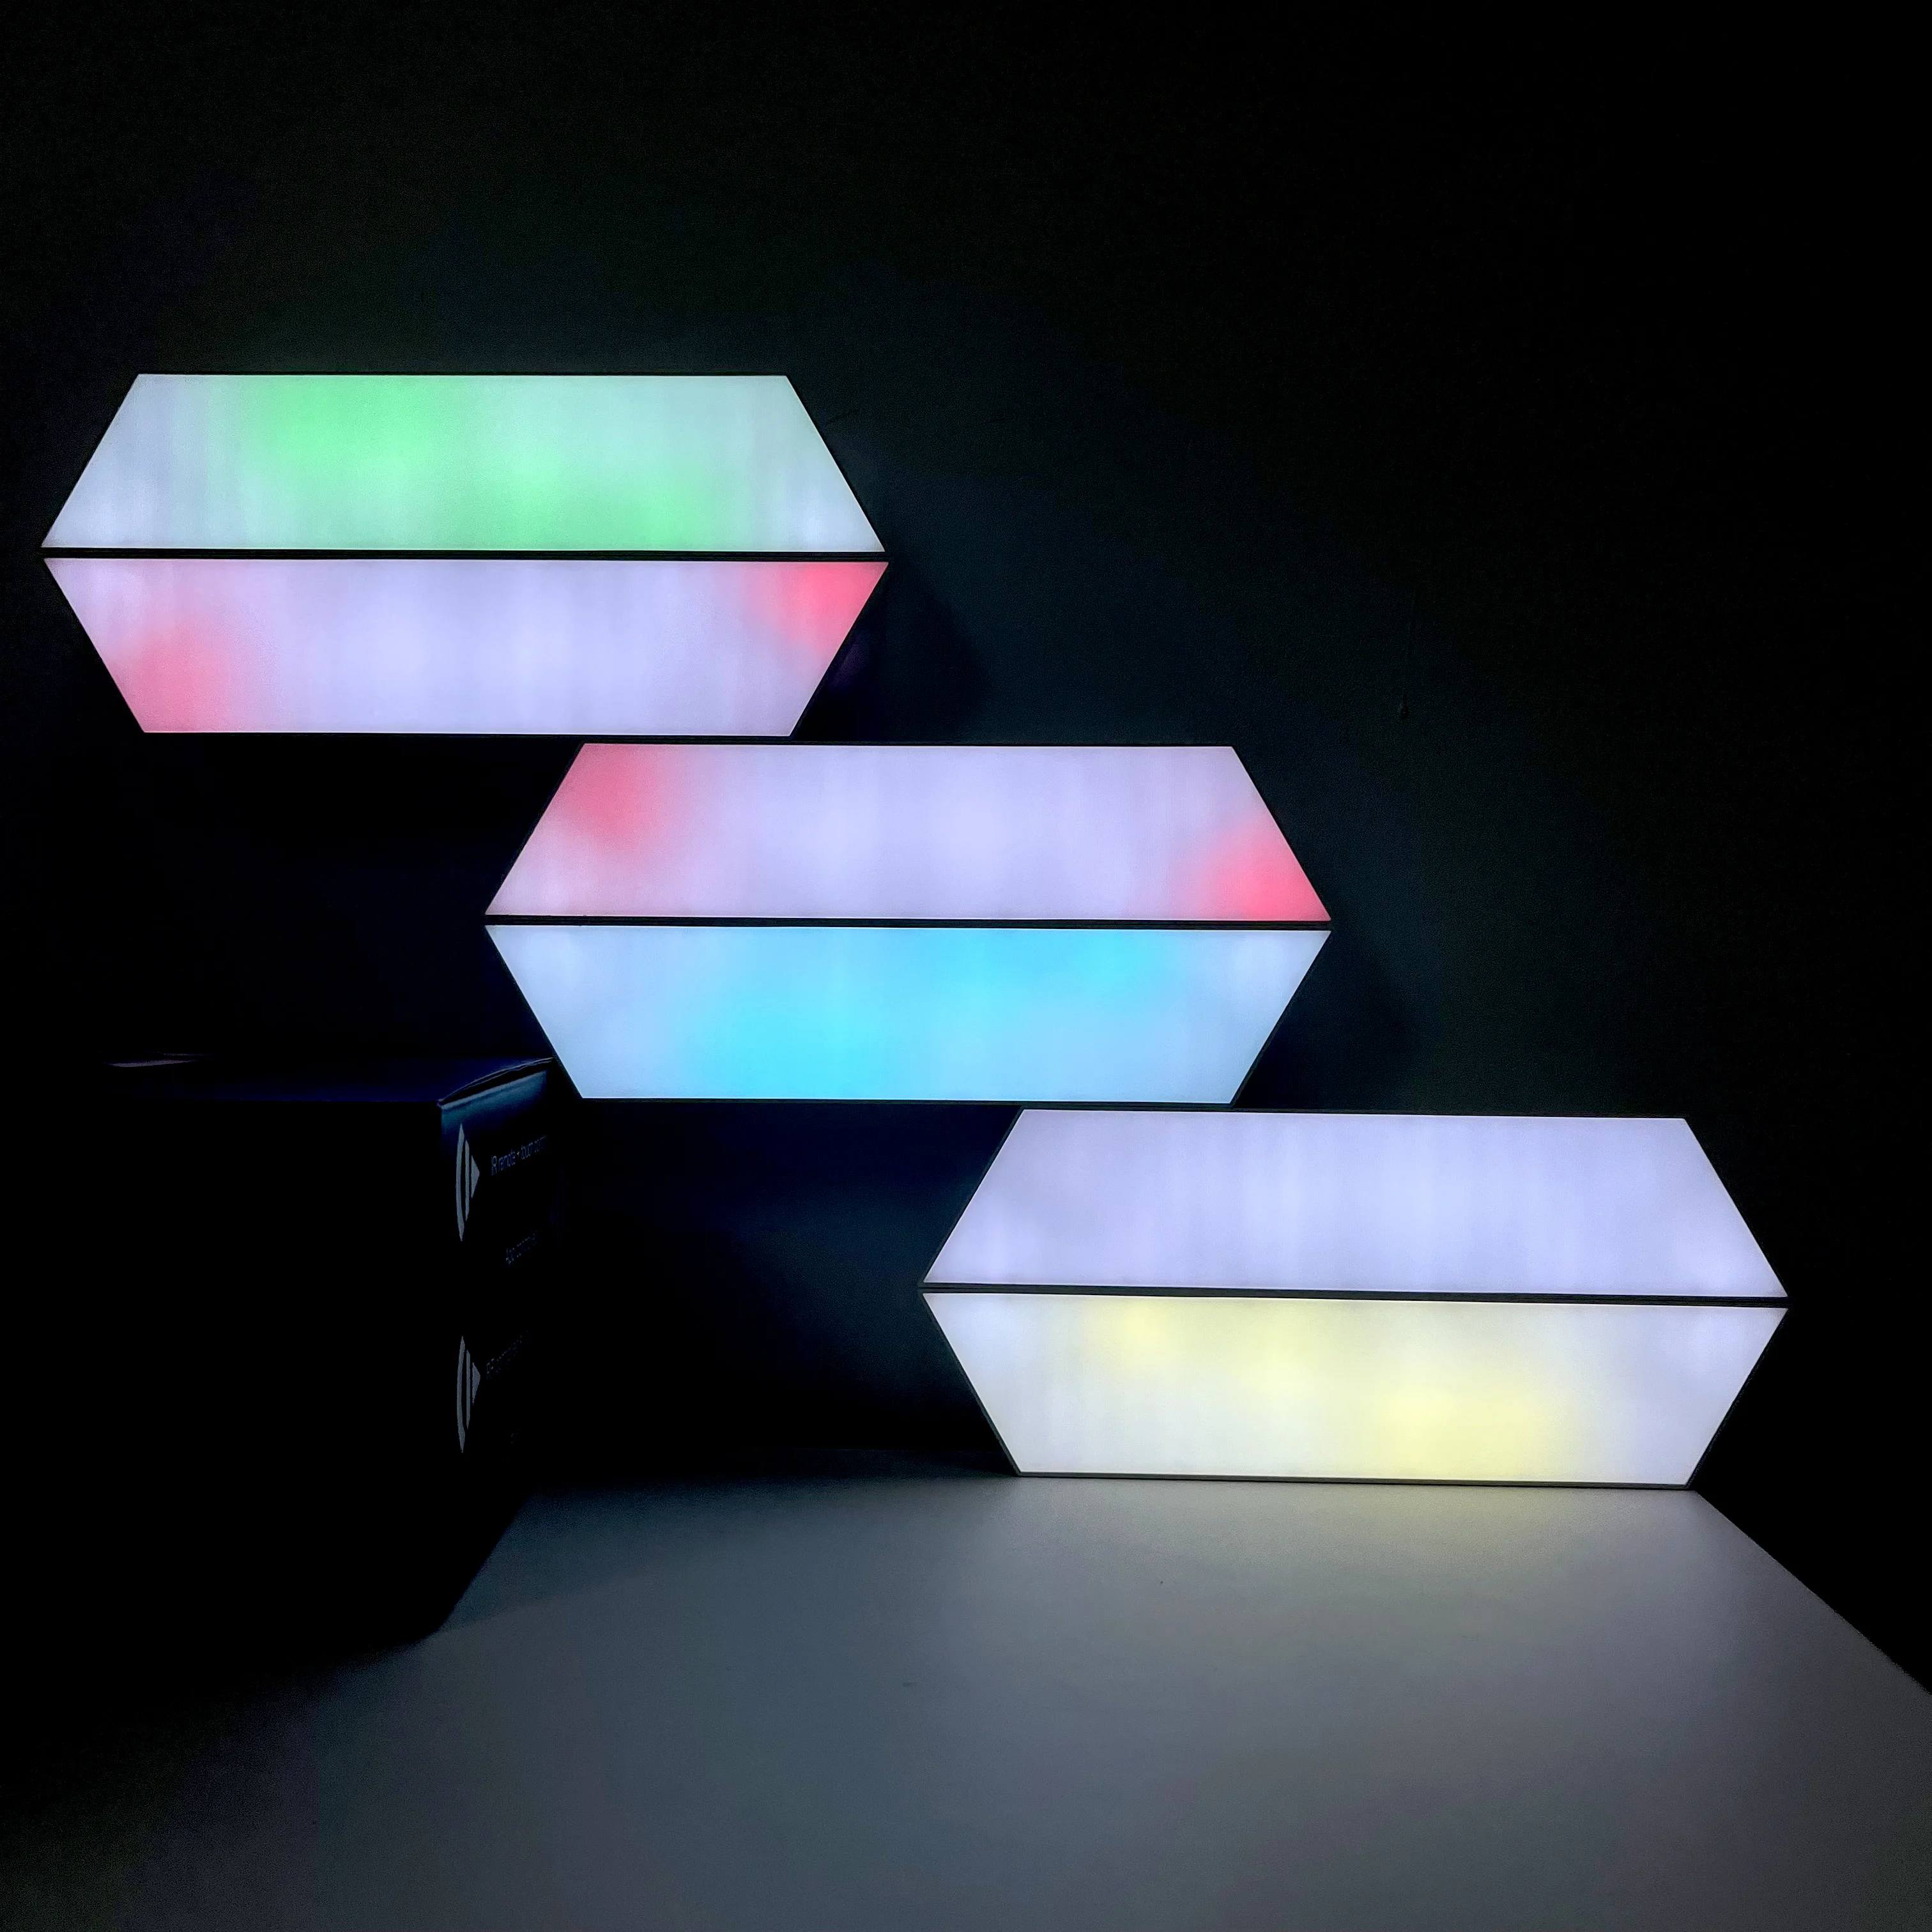 holdall Splendor uddannelse New Idea Diy Smart Trapezoid Wall Lamp Geometry Splicing Rf Control Music  Rhythm Led Lights Modular Game Room Lights - Buy Rf Controlled Trapezoid Gaming  Lights Setup For Home Decor,Switch Atmosphere Game